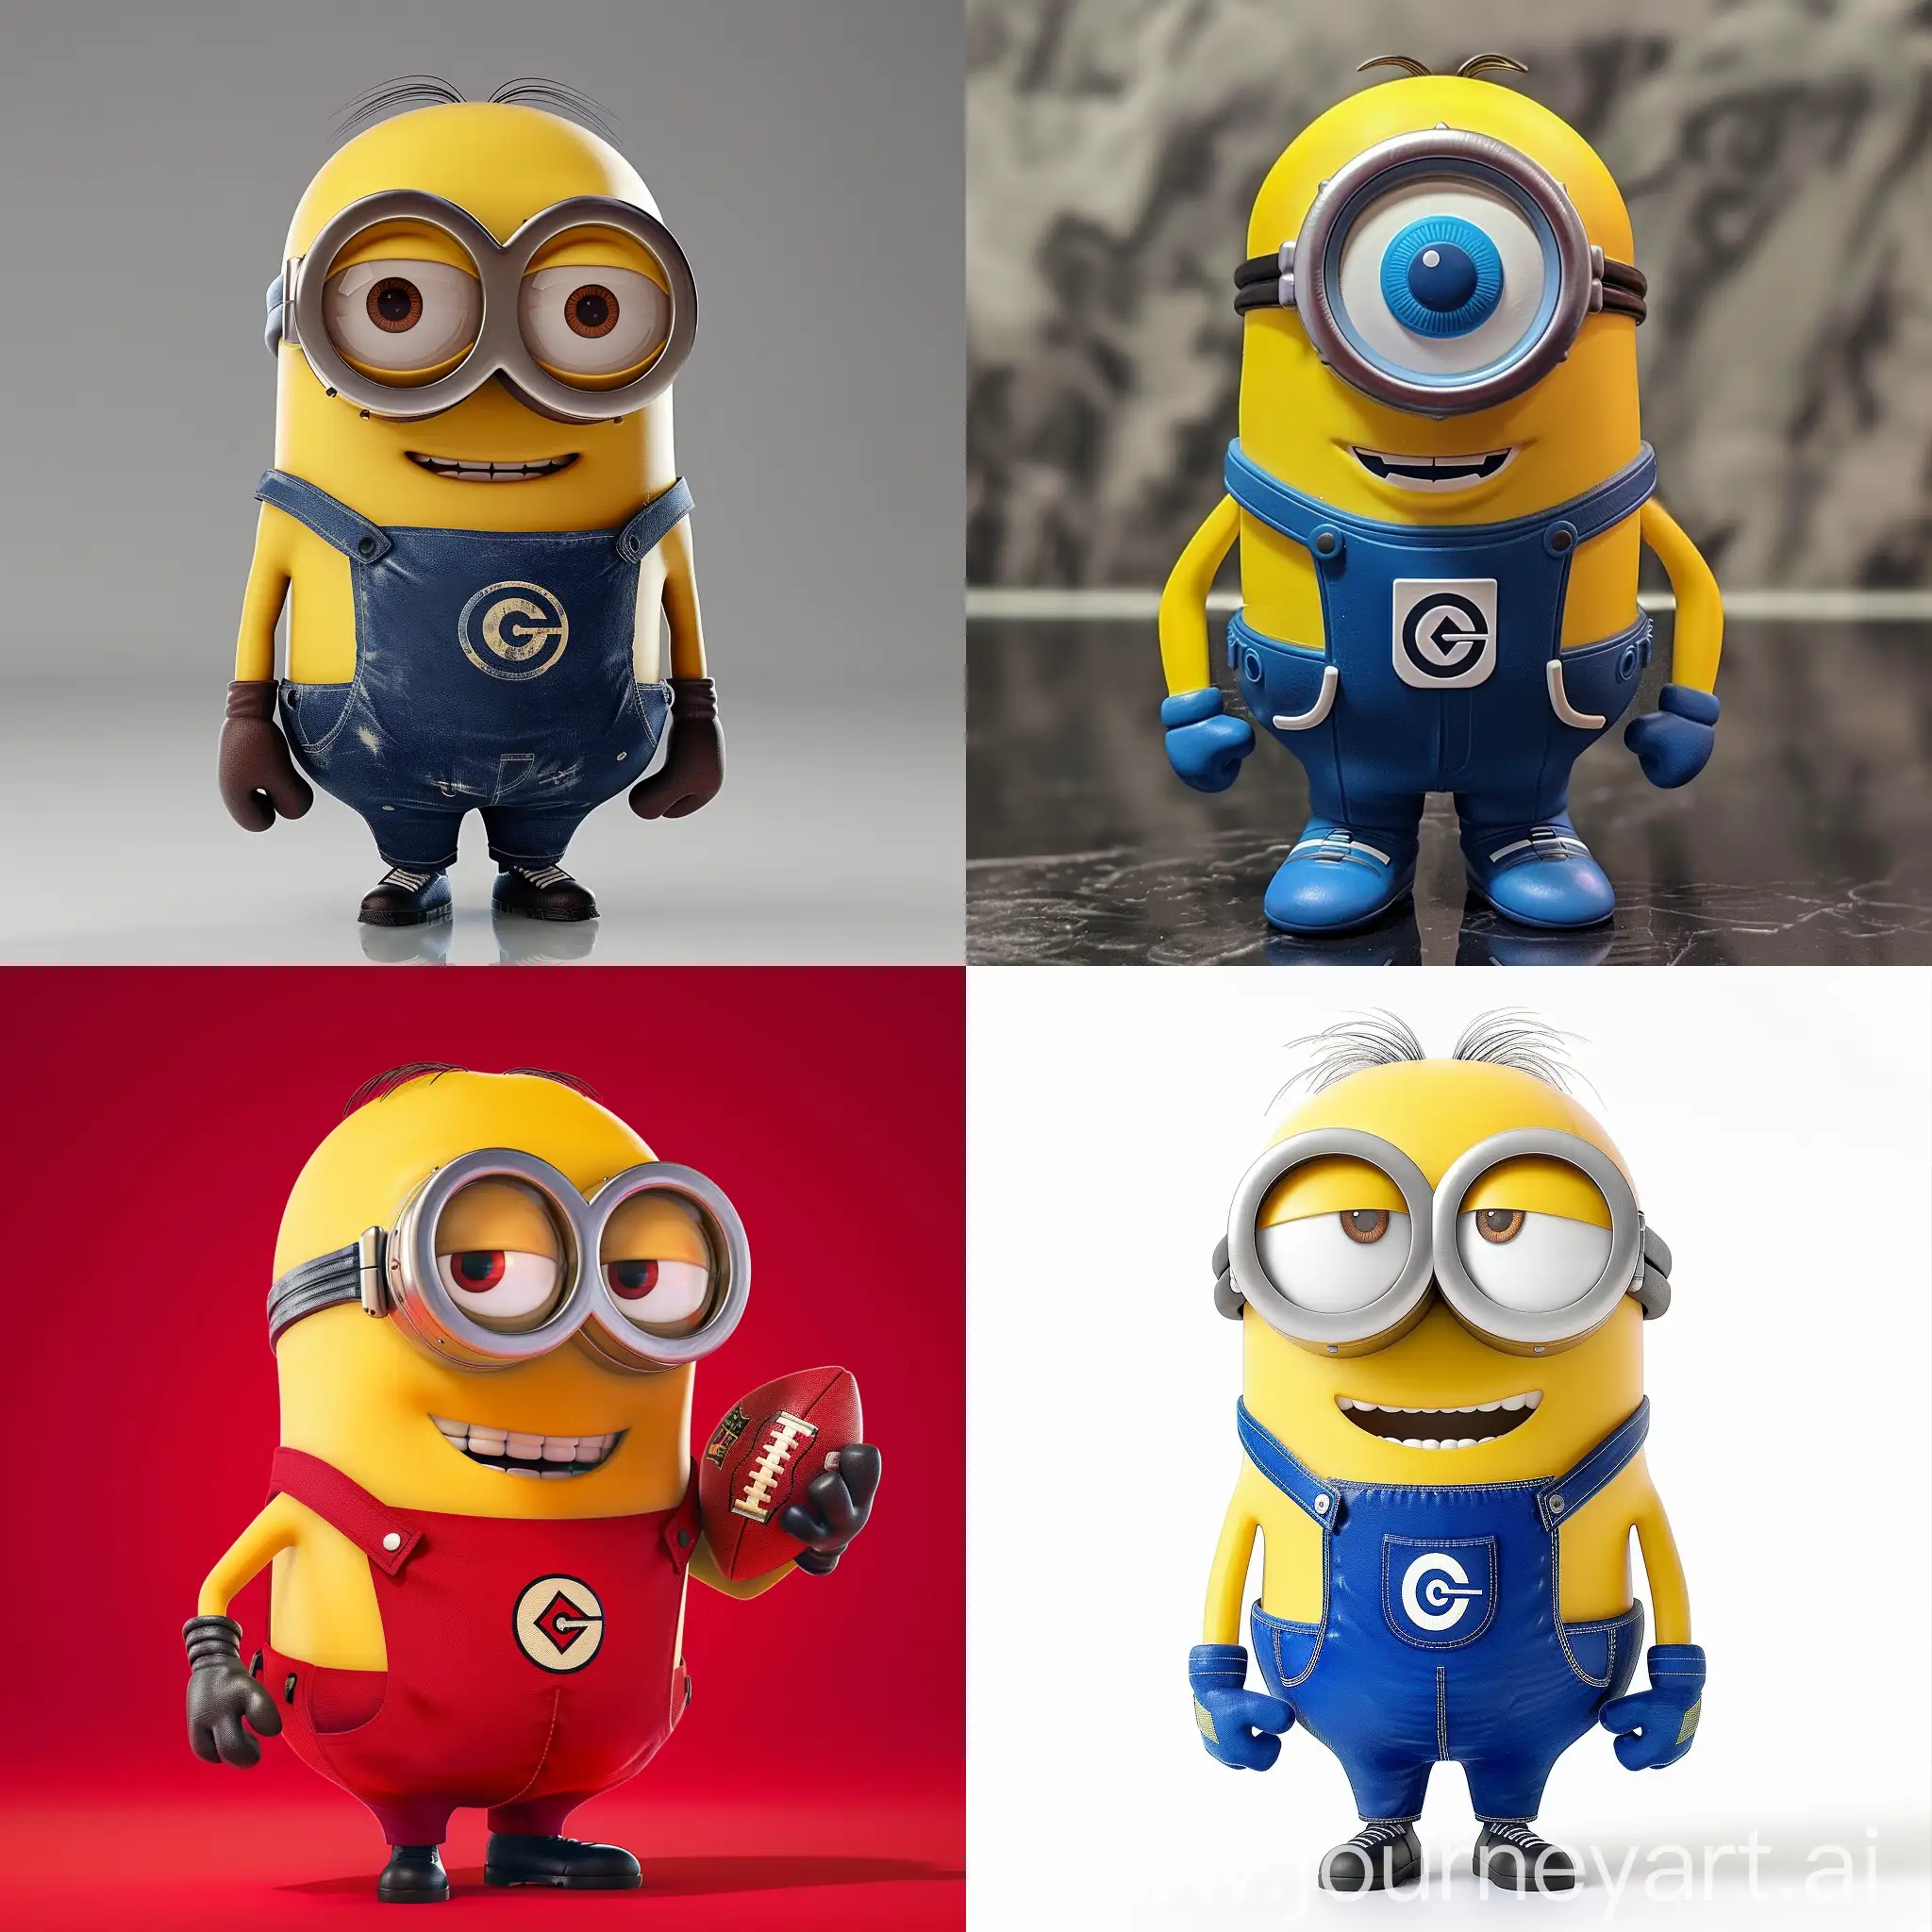 Minion-Football-Player-Ready-for-Action